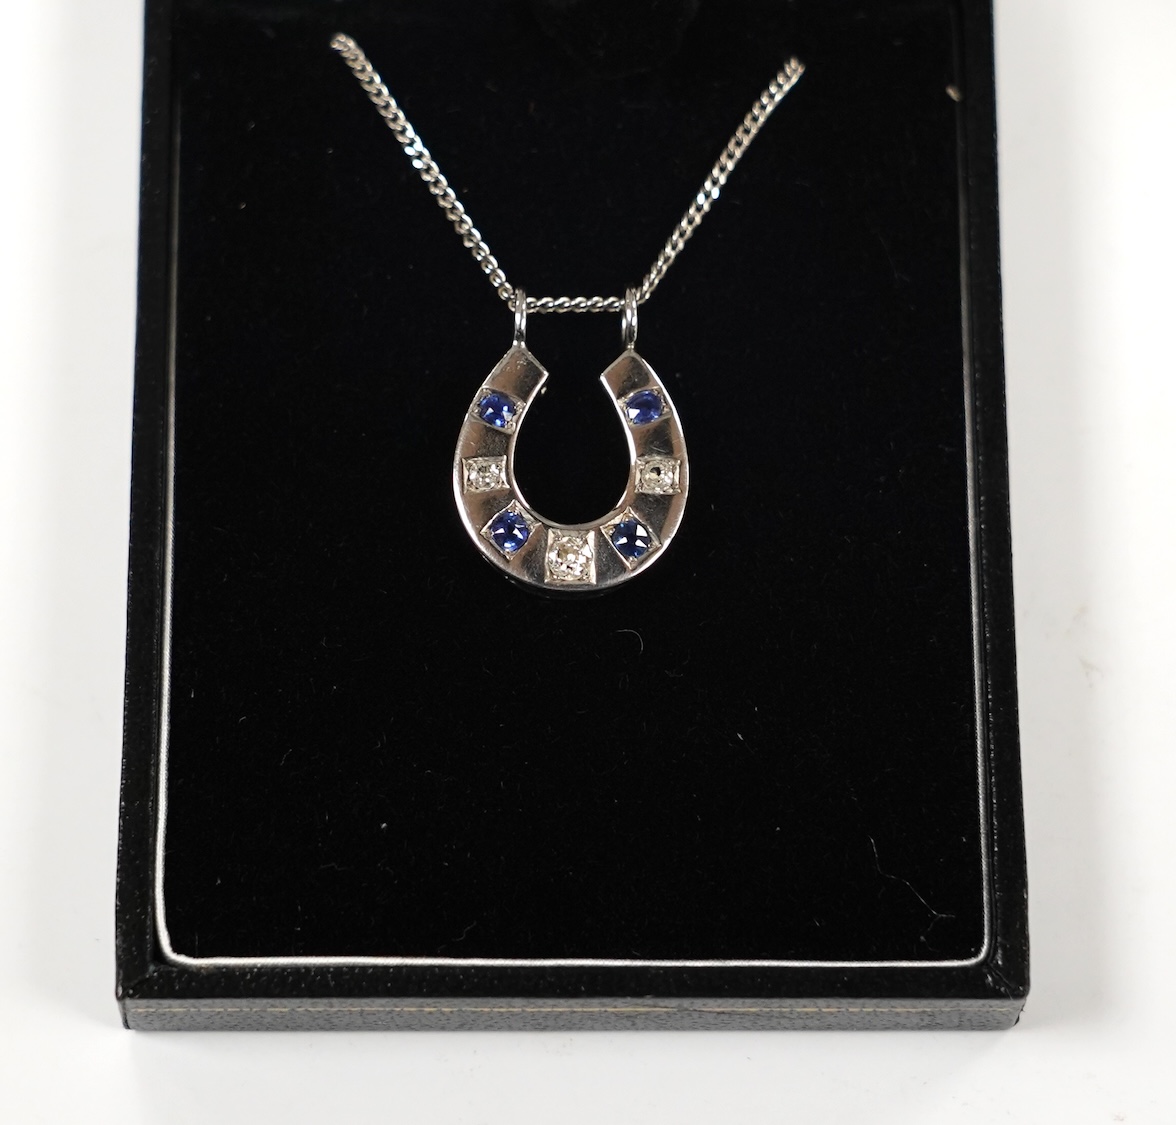 A modern 18ct white gold, sapphire and diamond set horseshoe pendant on chain, overall 44cm, gross weight 5.5 grams. Condition - fair